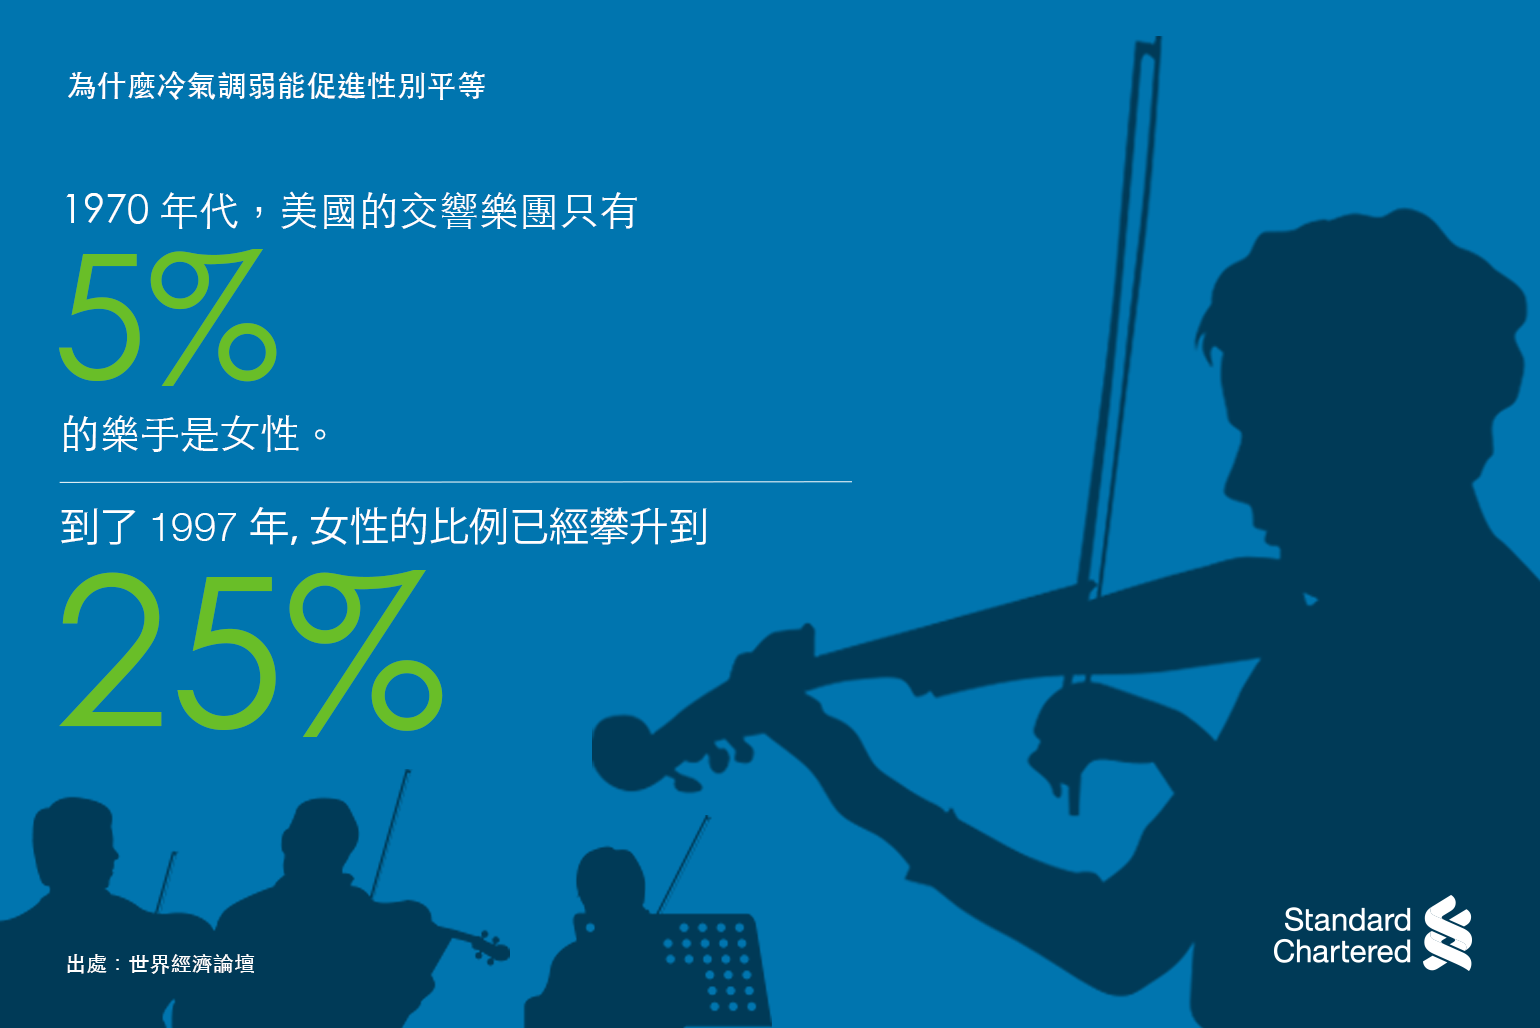 In the 1970s, US symphony orchestras featured just 5% of female players.